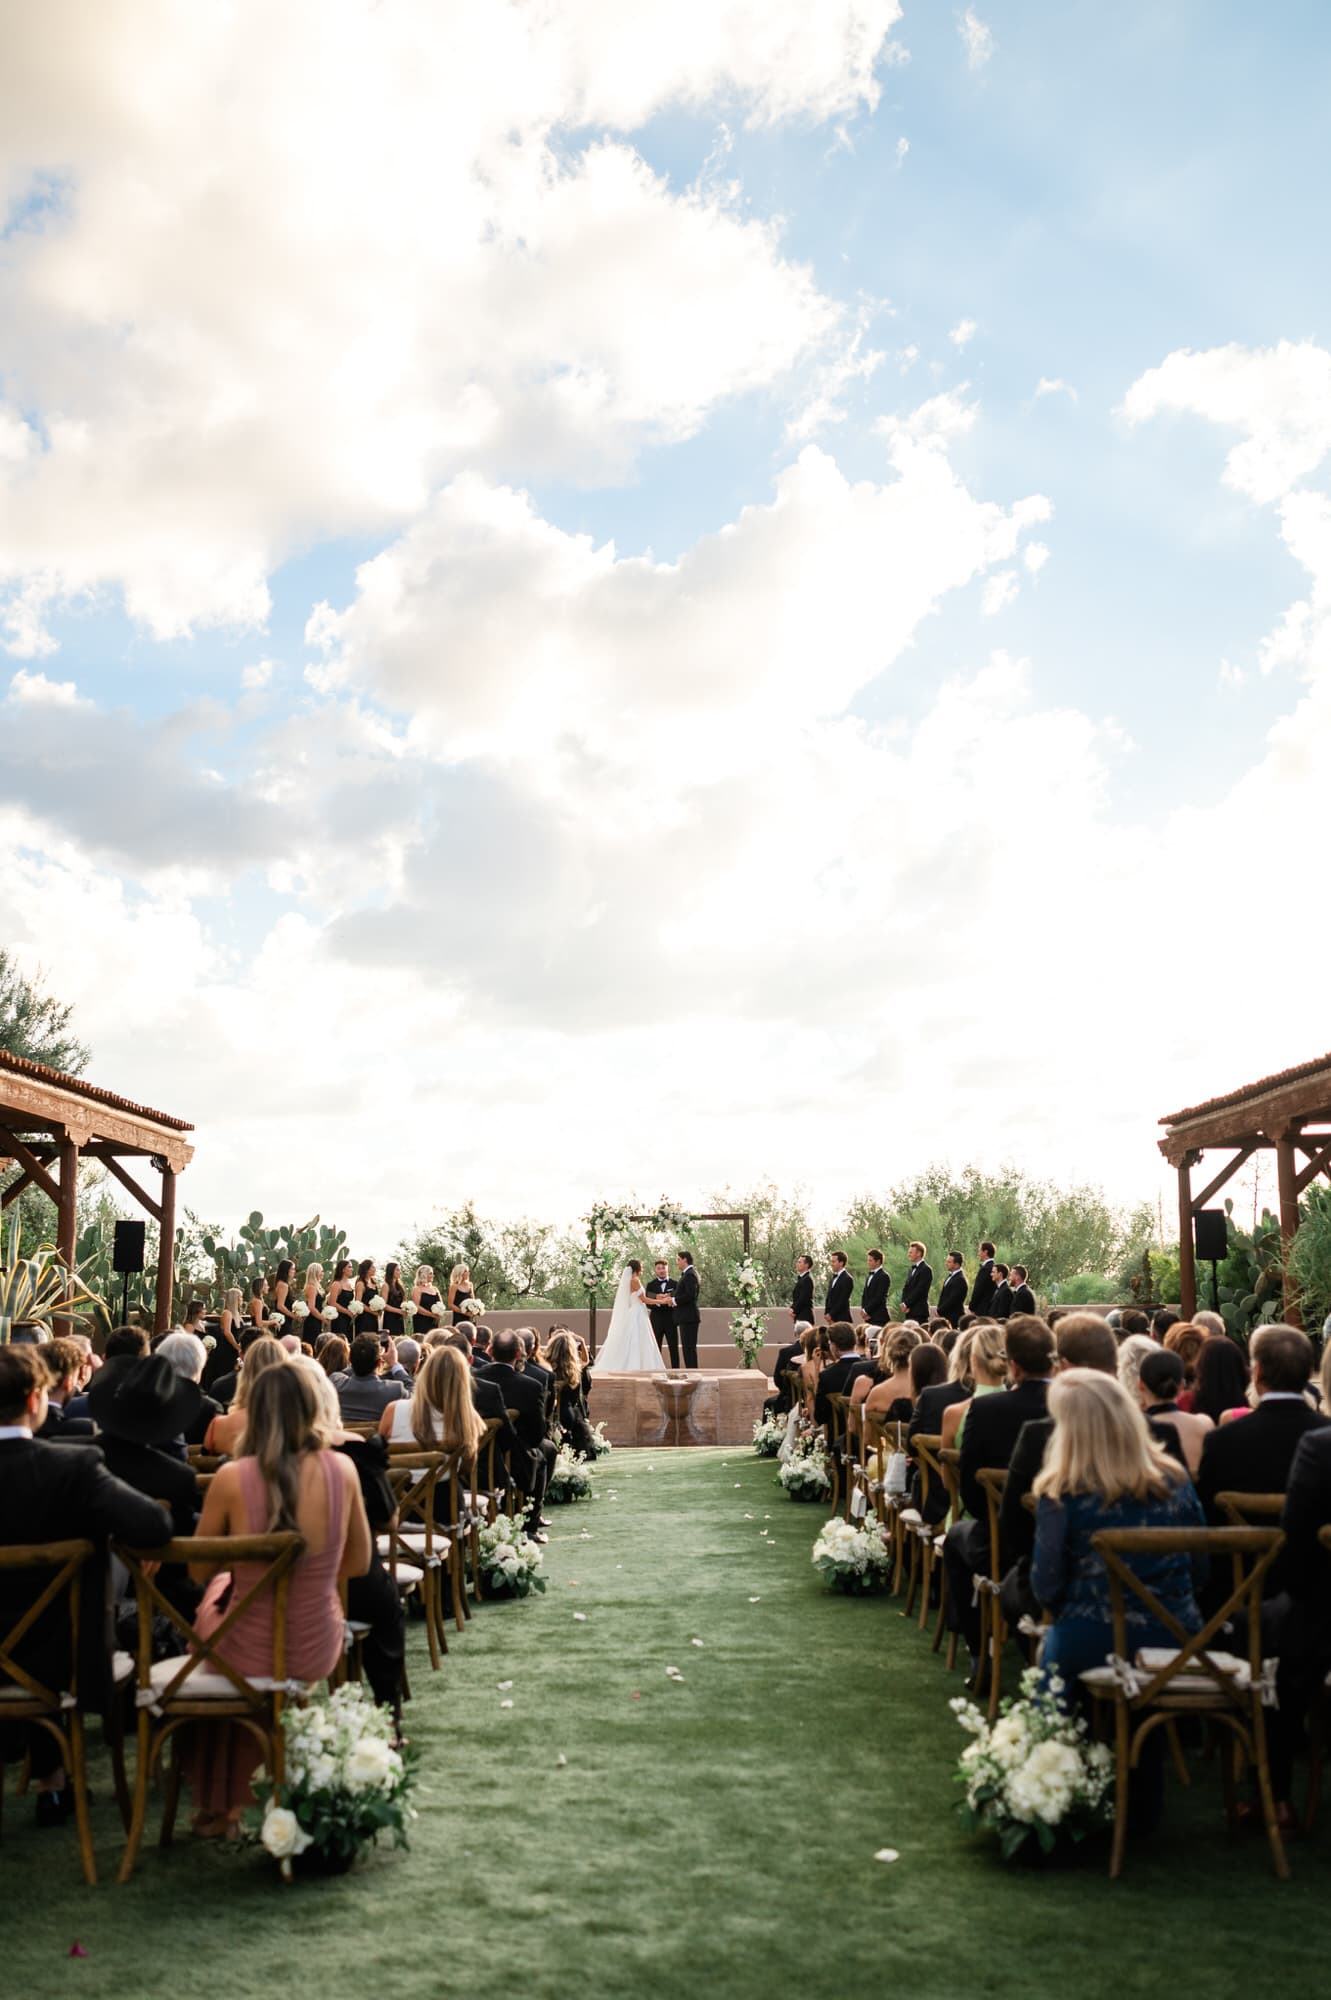 Overview of the main ceremony lawn at the Four Seasons at Troon North during the wedding ceremony.